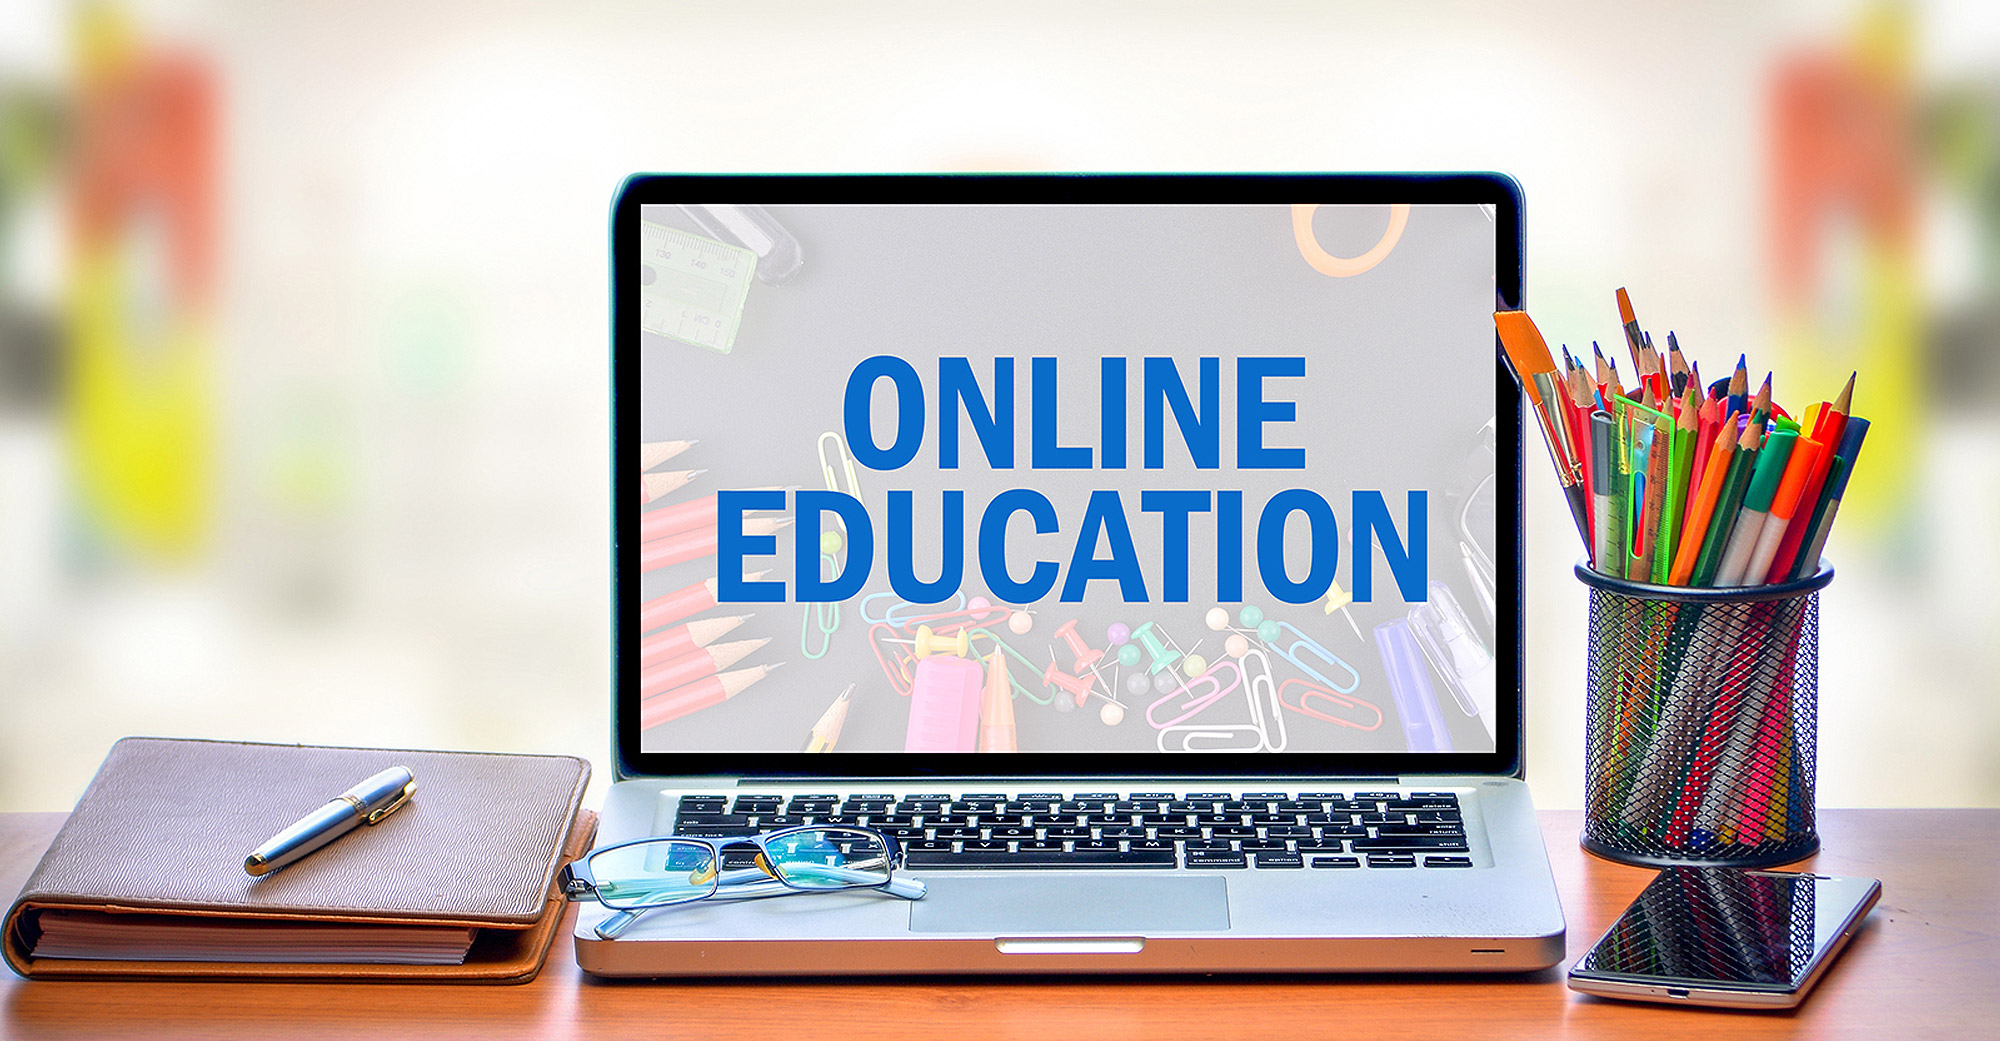 introduction of online education effect on learning